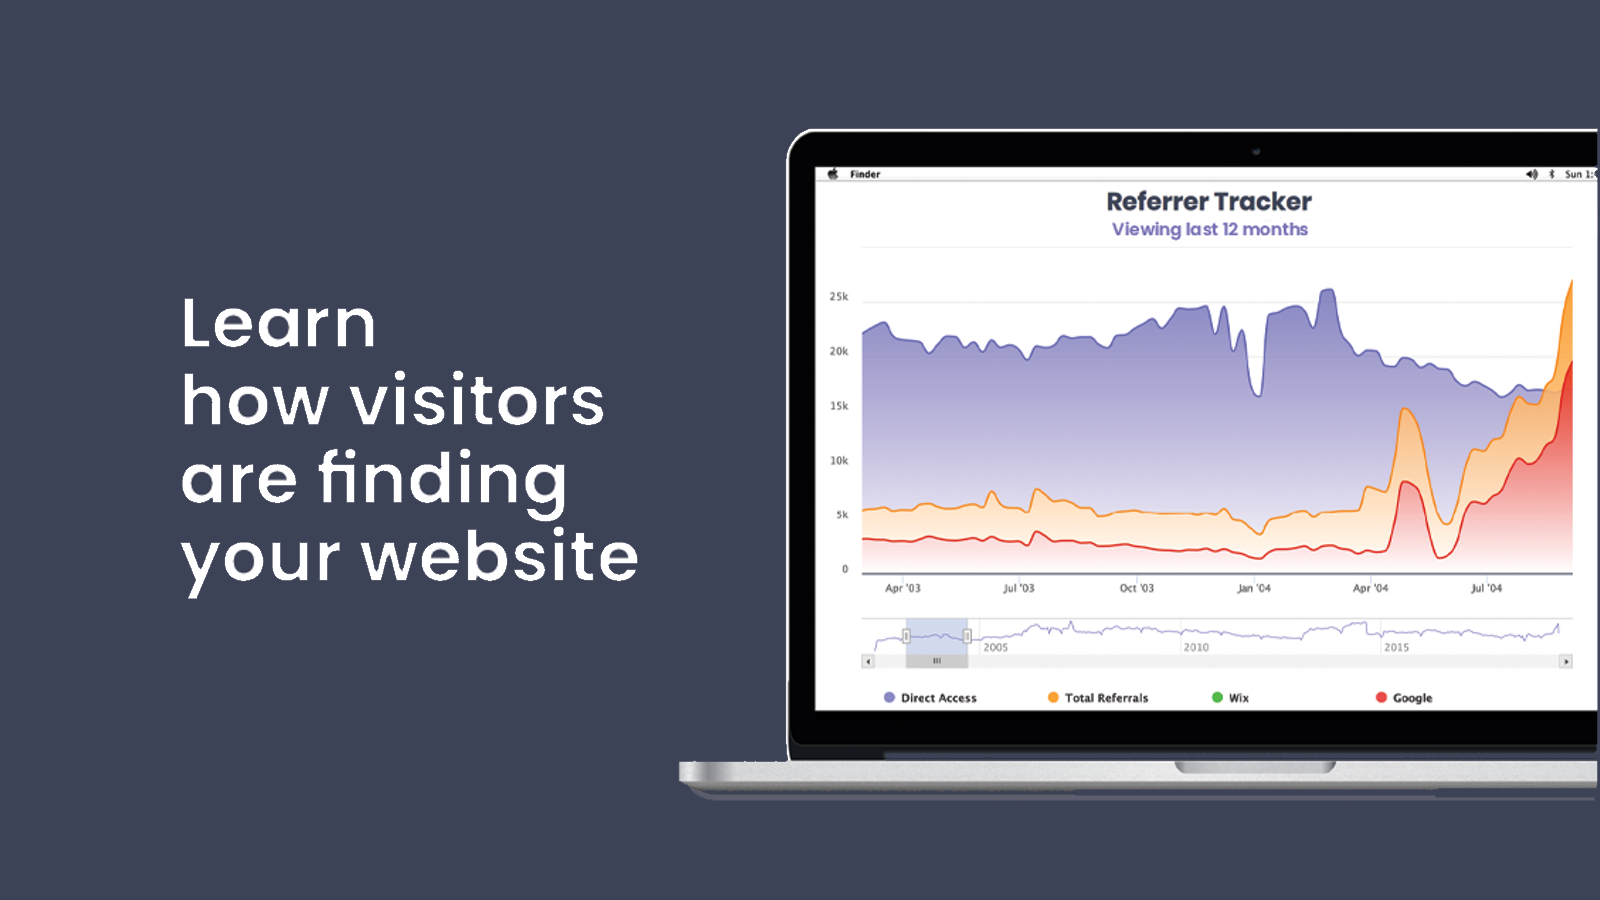 Find out how visitors find your site.